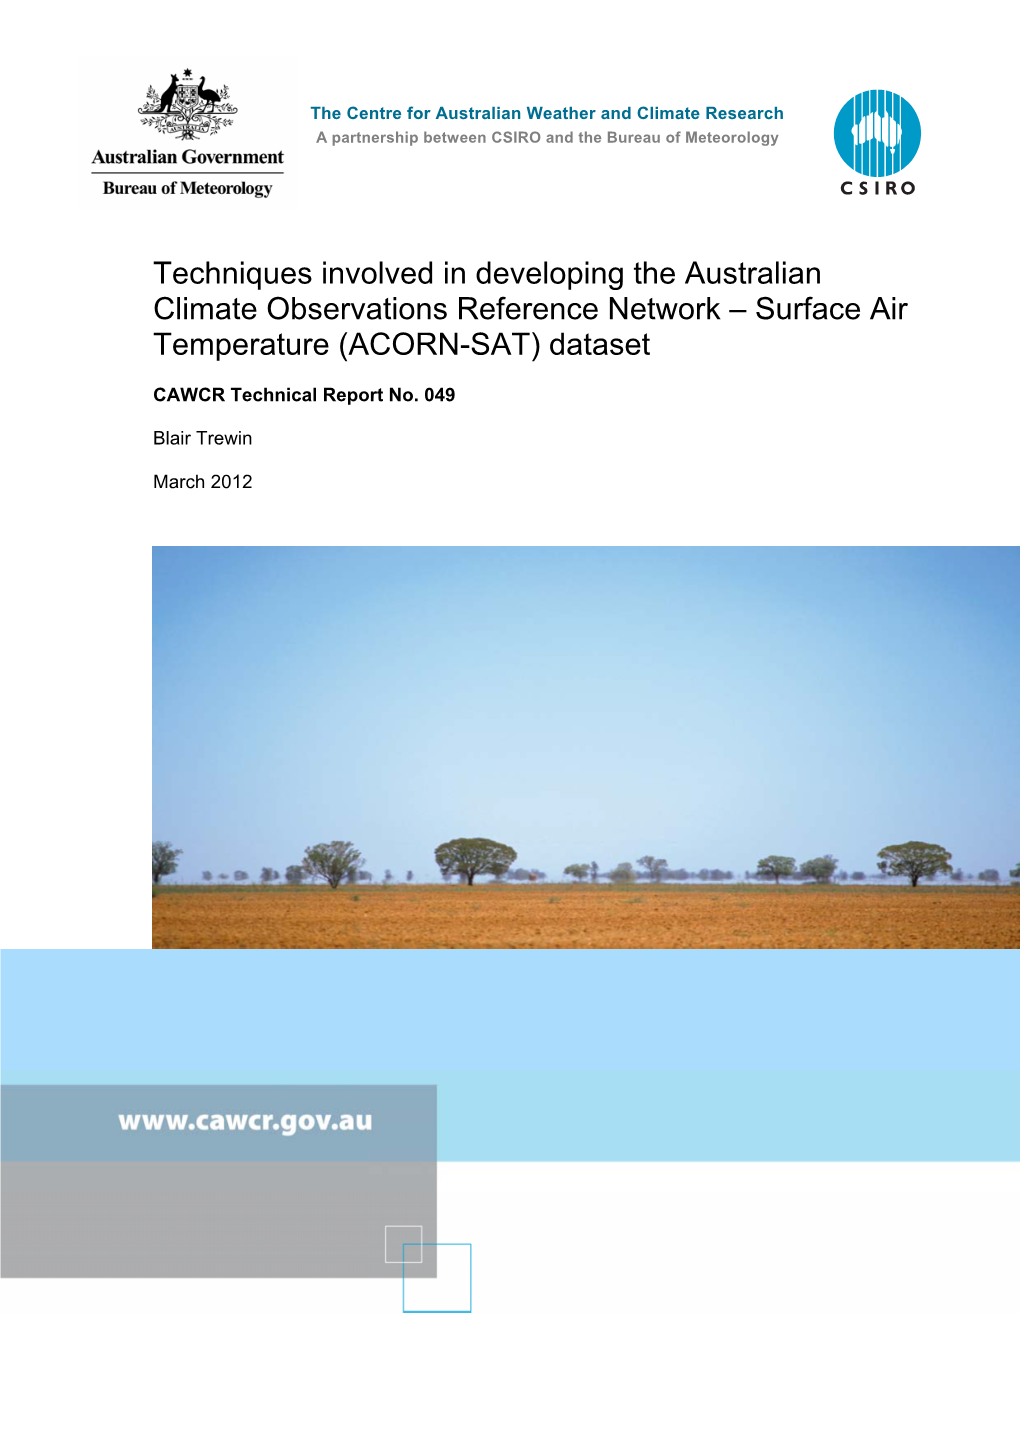 Techniques Involved in Developing the Australian Climate Observations Reference Network – Surface Air Temperature (ACORN-SAT) Dataset